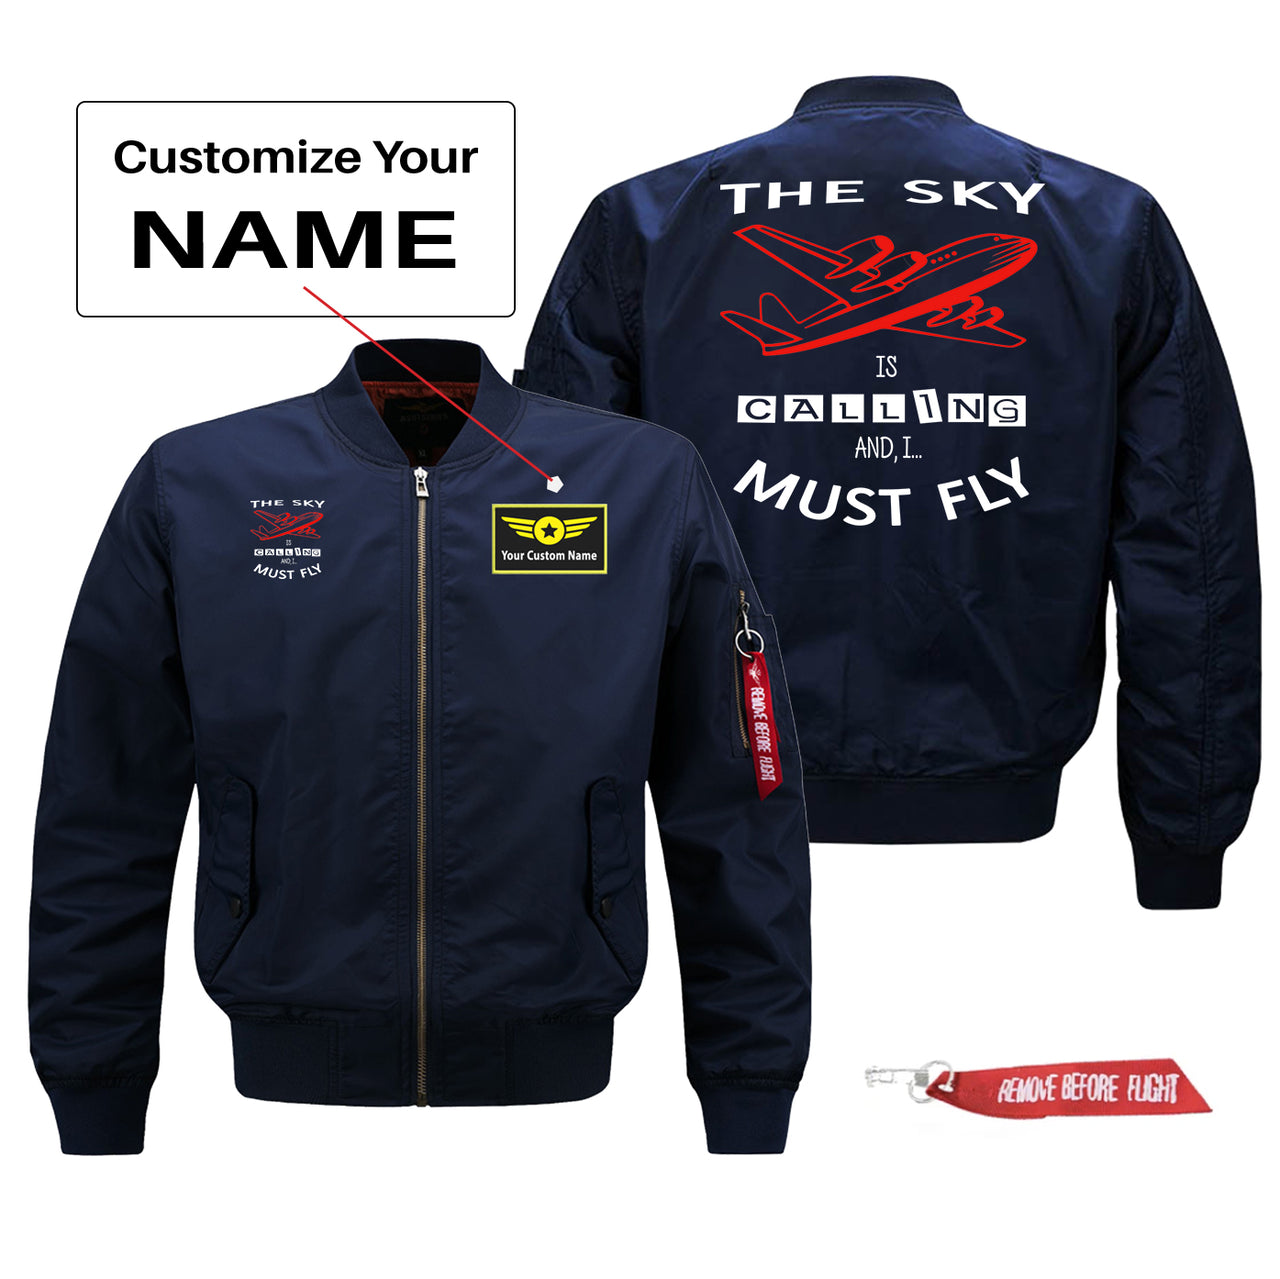 The Sky is Calling and I Must Fly Designed Pilot Jackets (Customizable)